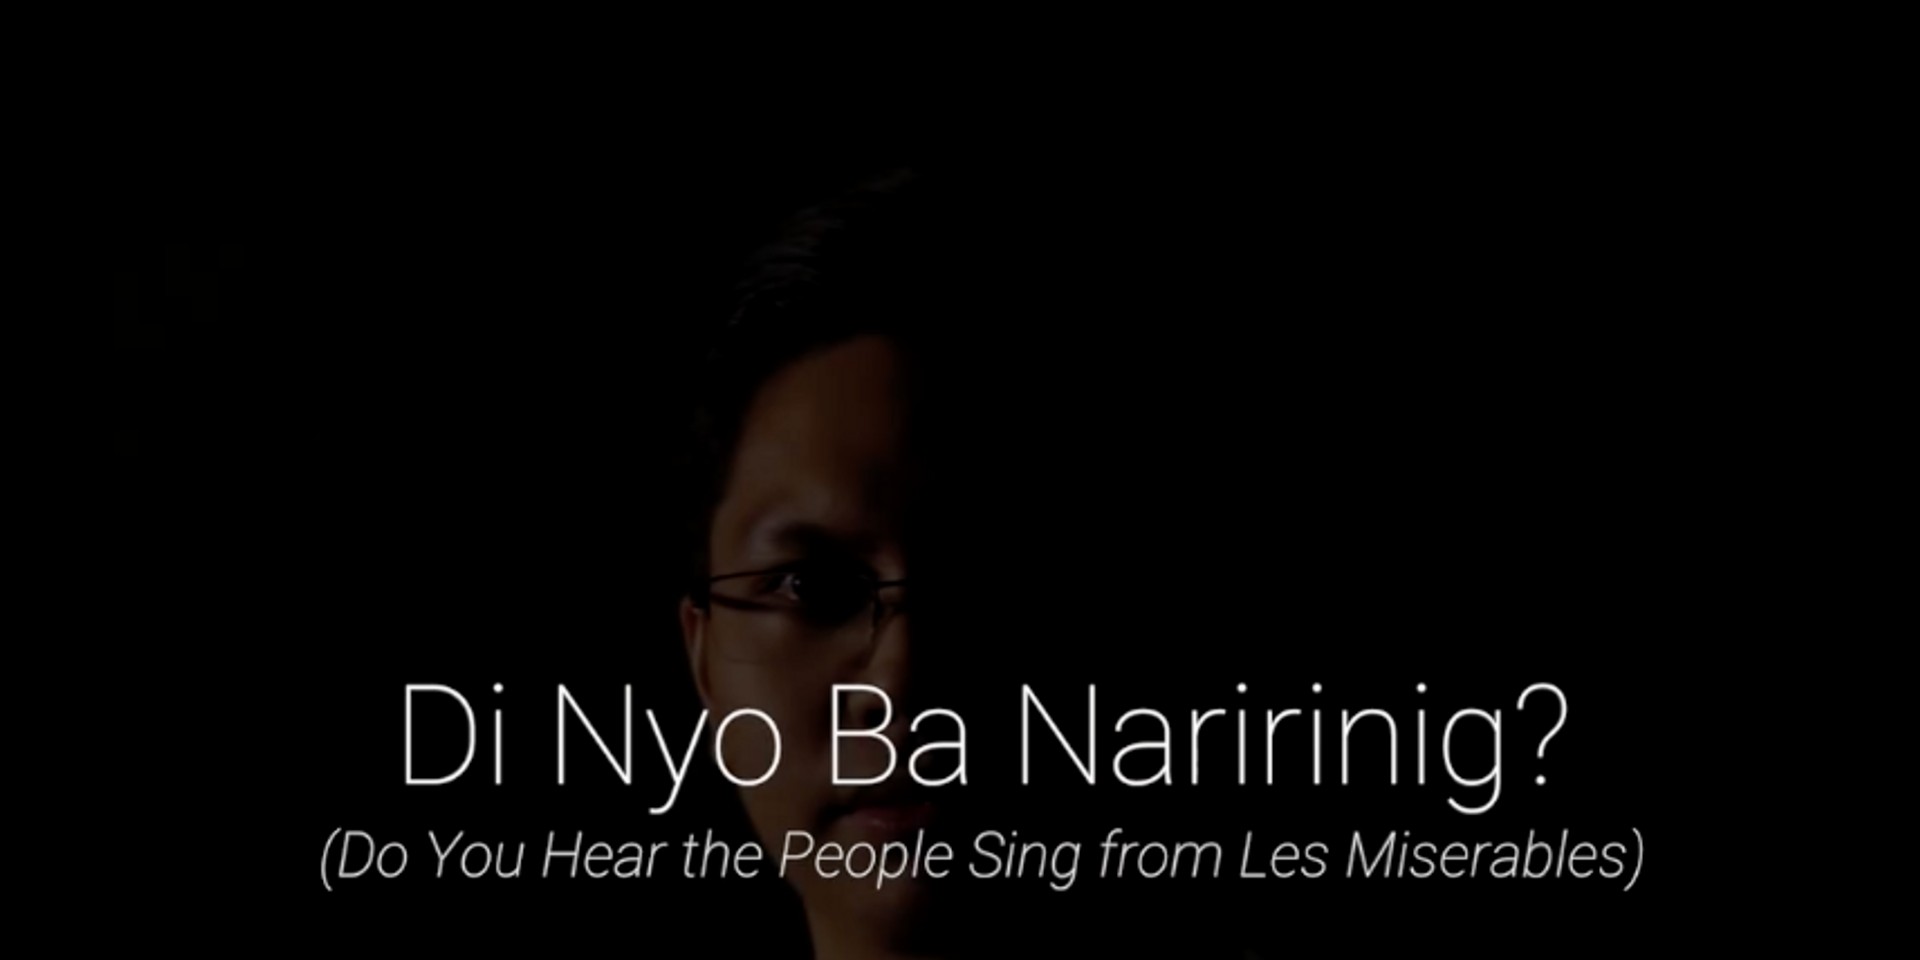 Watch this Filipino take on Les Misérables's 'Do You Hear The People Sing?'